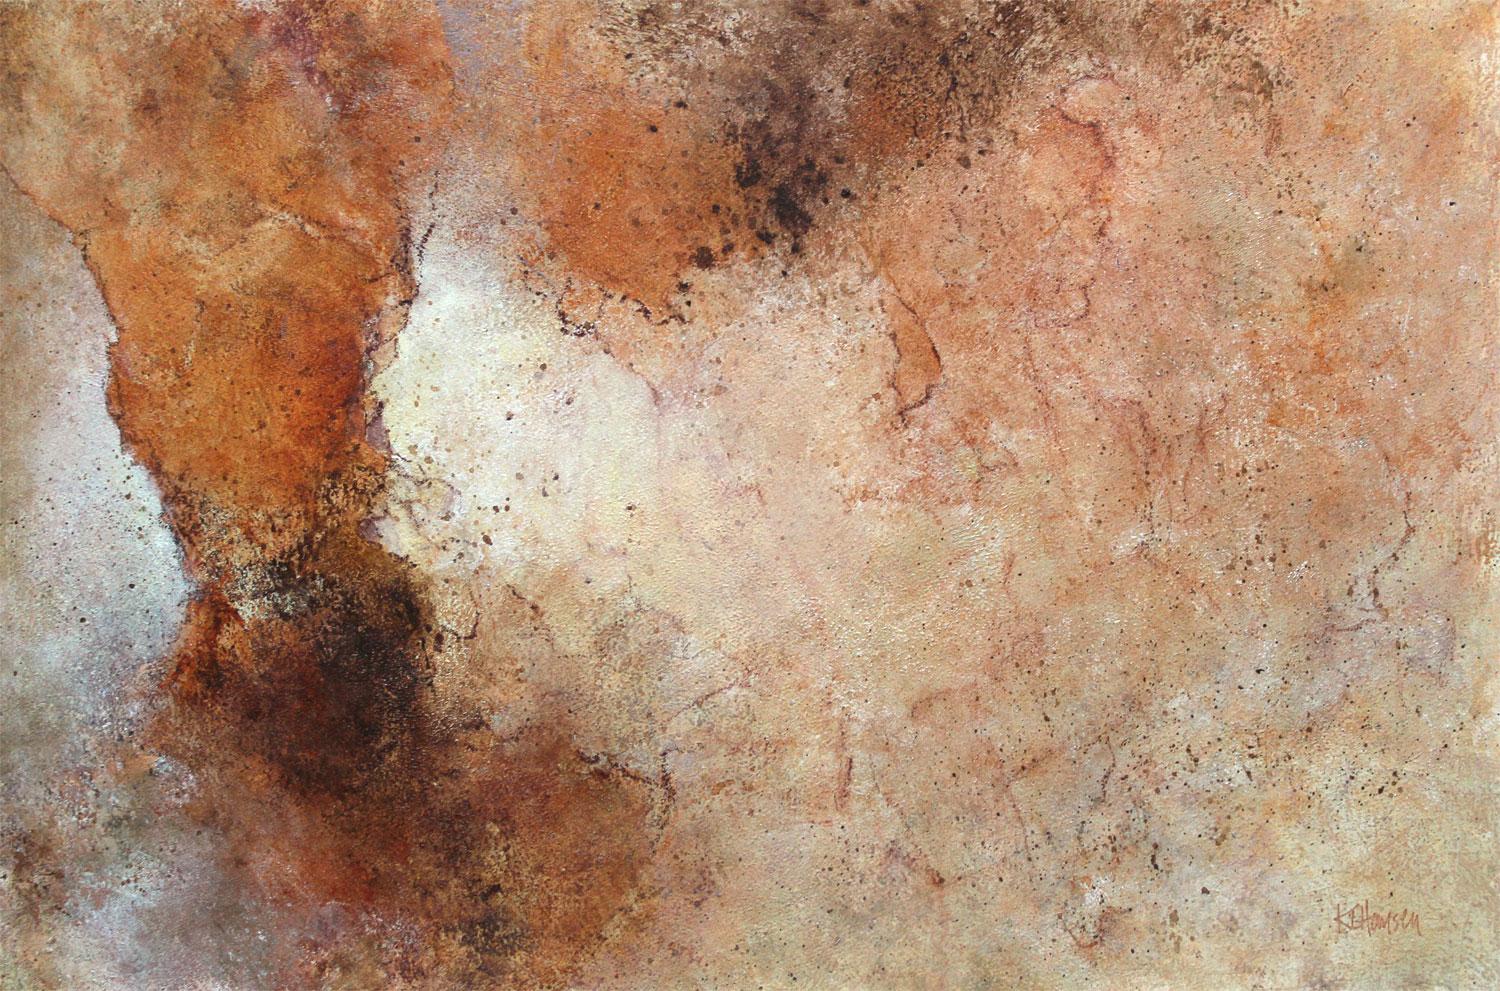 <p>Artist Comments<br />Limited palette of rich earth tones with high contrast, giving the painting a nice sense of depth. Luminous and geological. Touches of watercolor crayon add a playfulness.</p><br /><p>About the Artist<br />Karen’s abstract